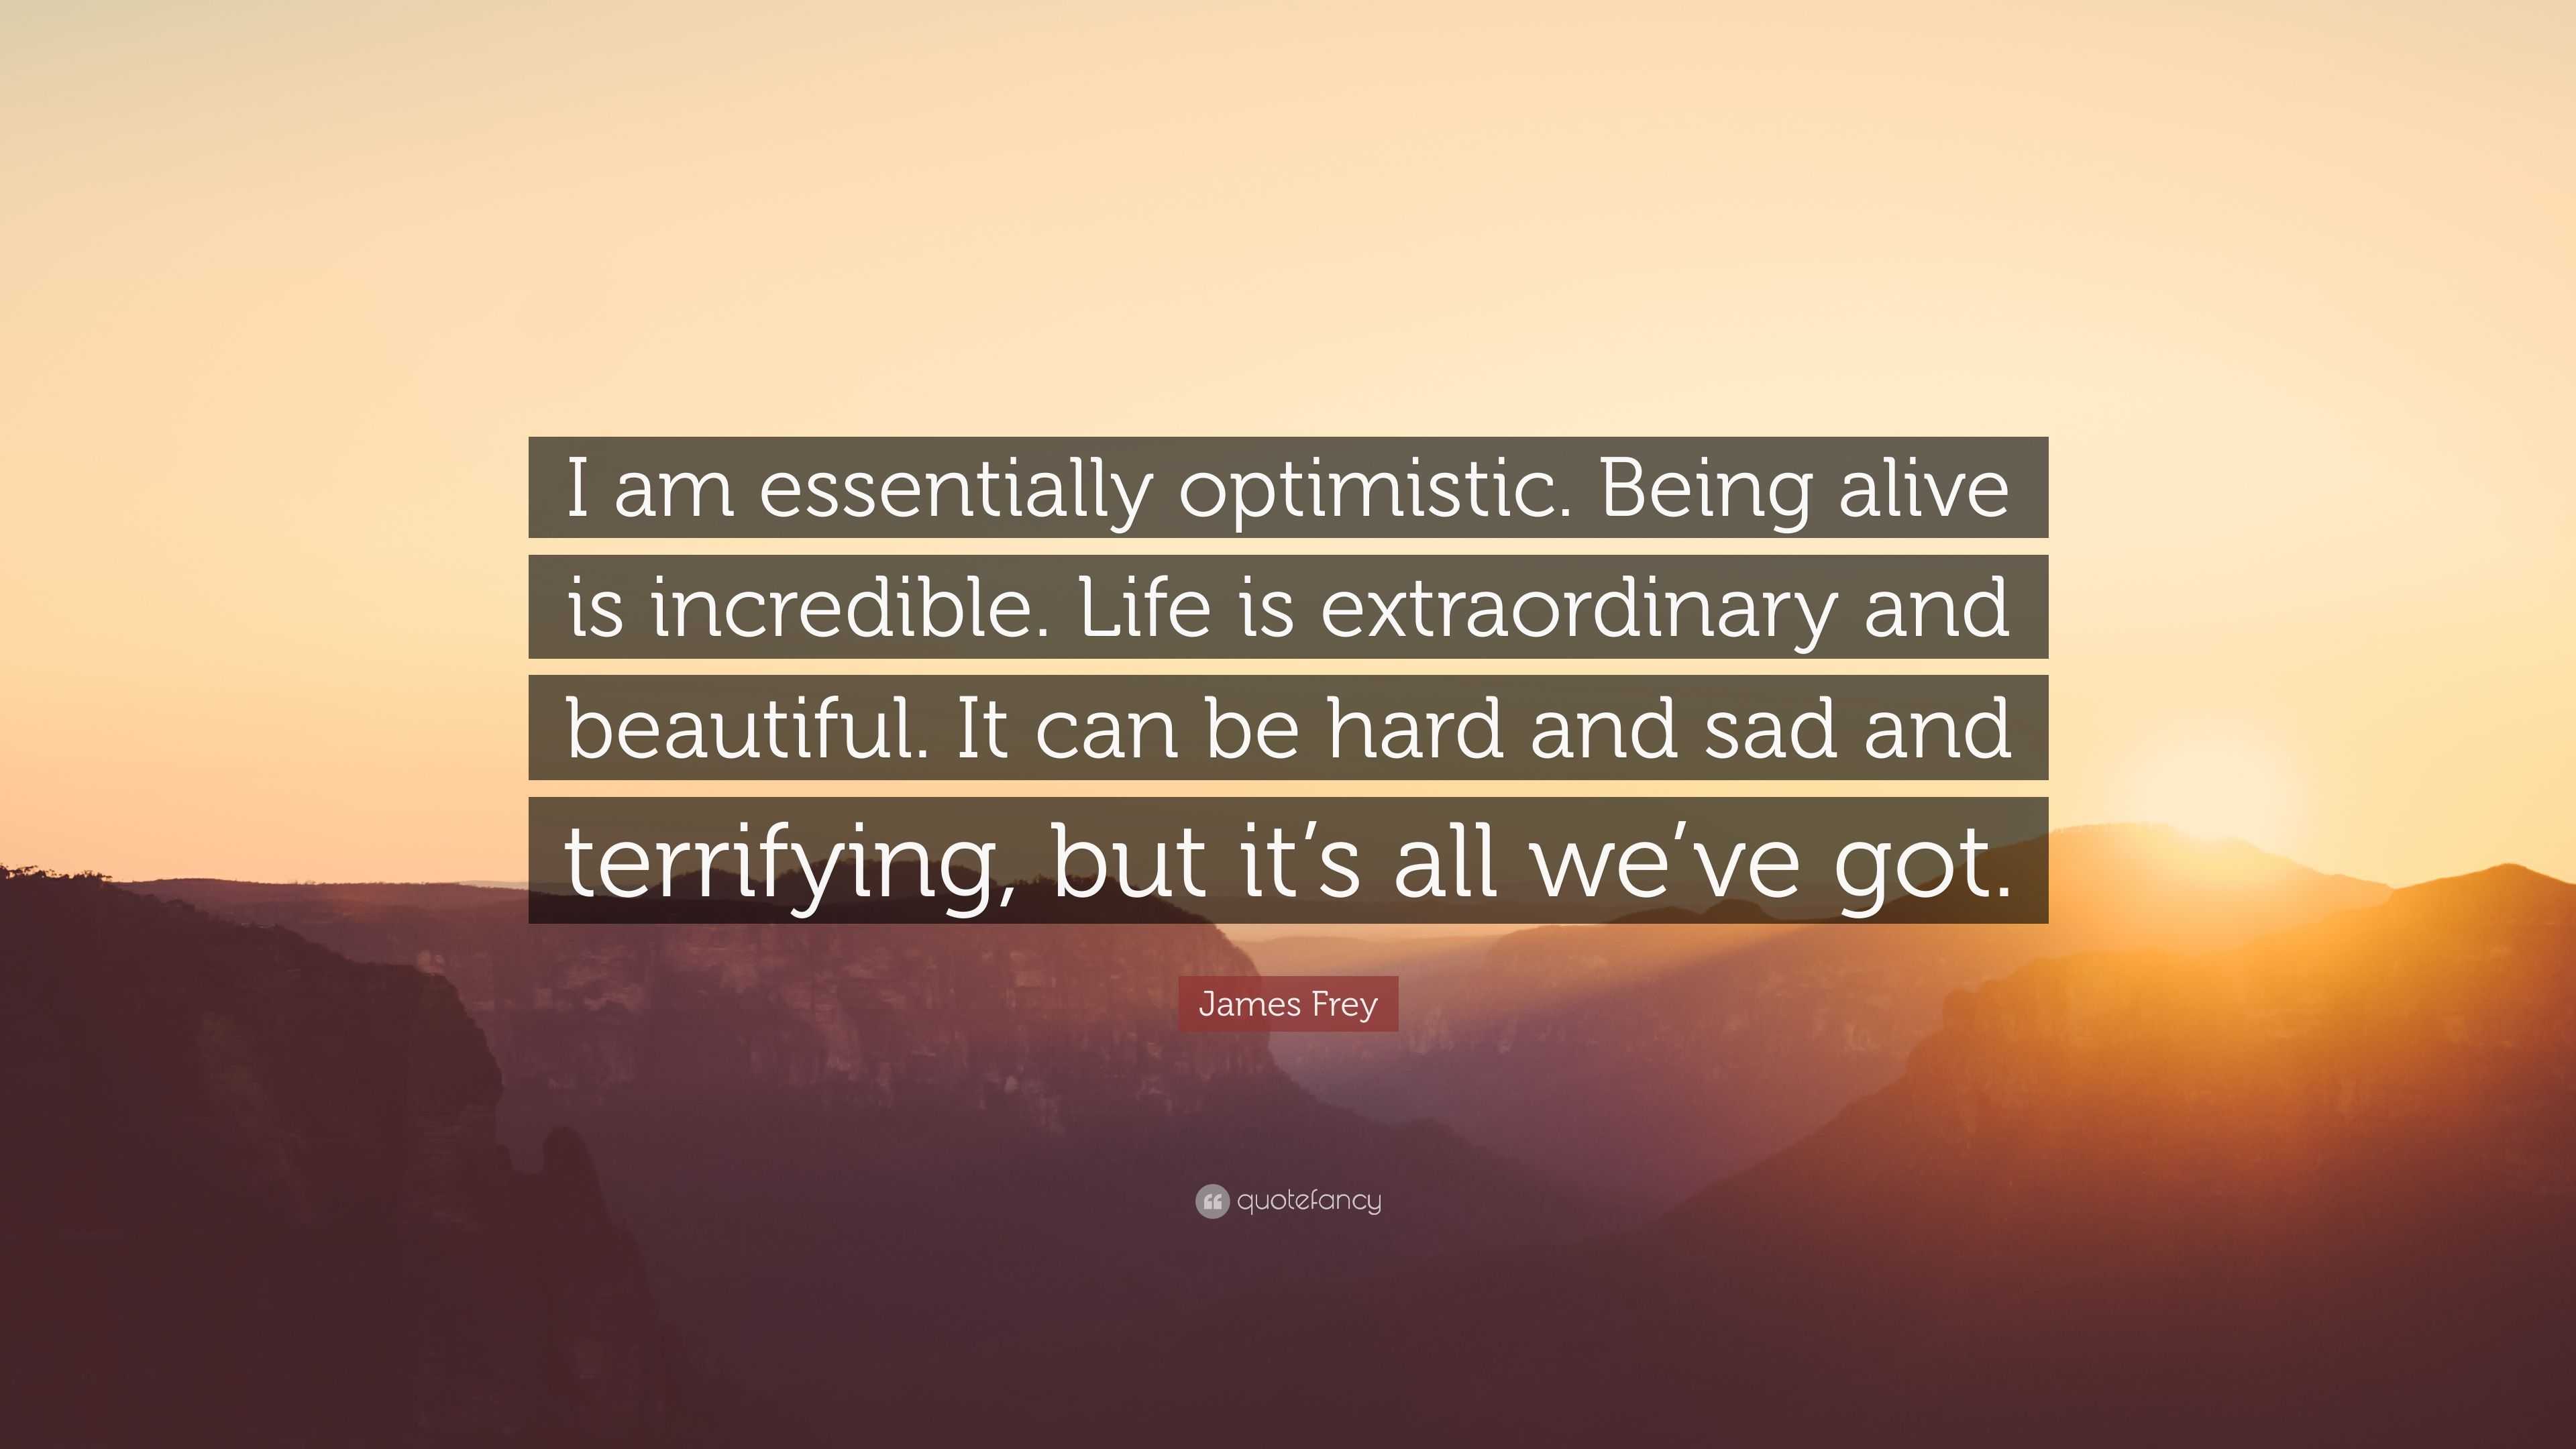 James Frey Quote “I am essentially optimistic Being alive is incredible Life